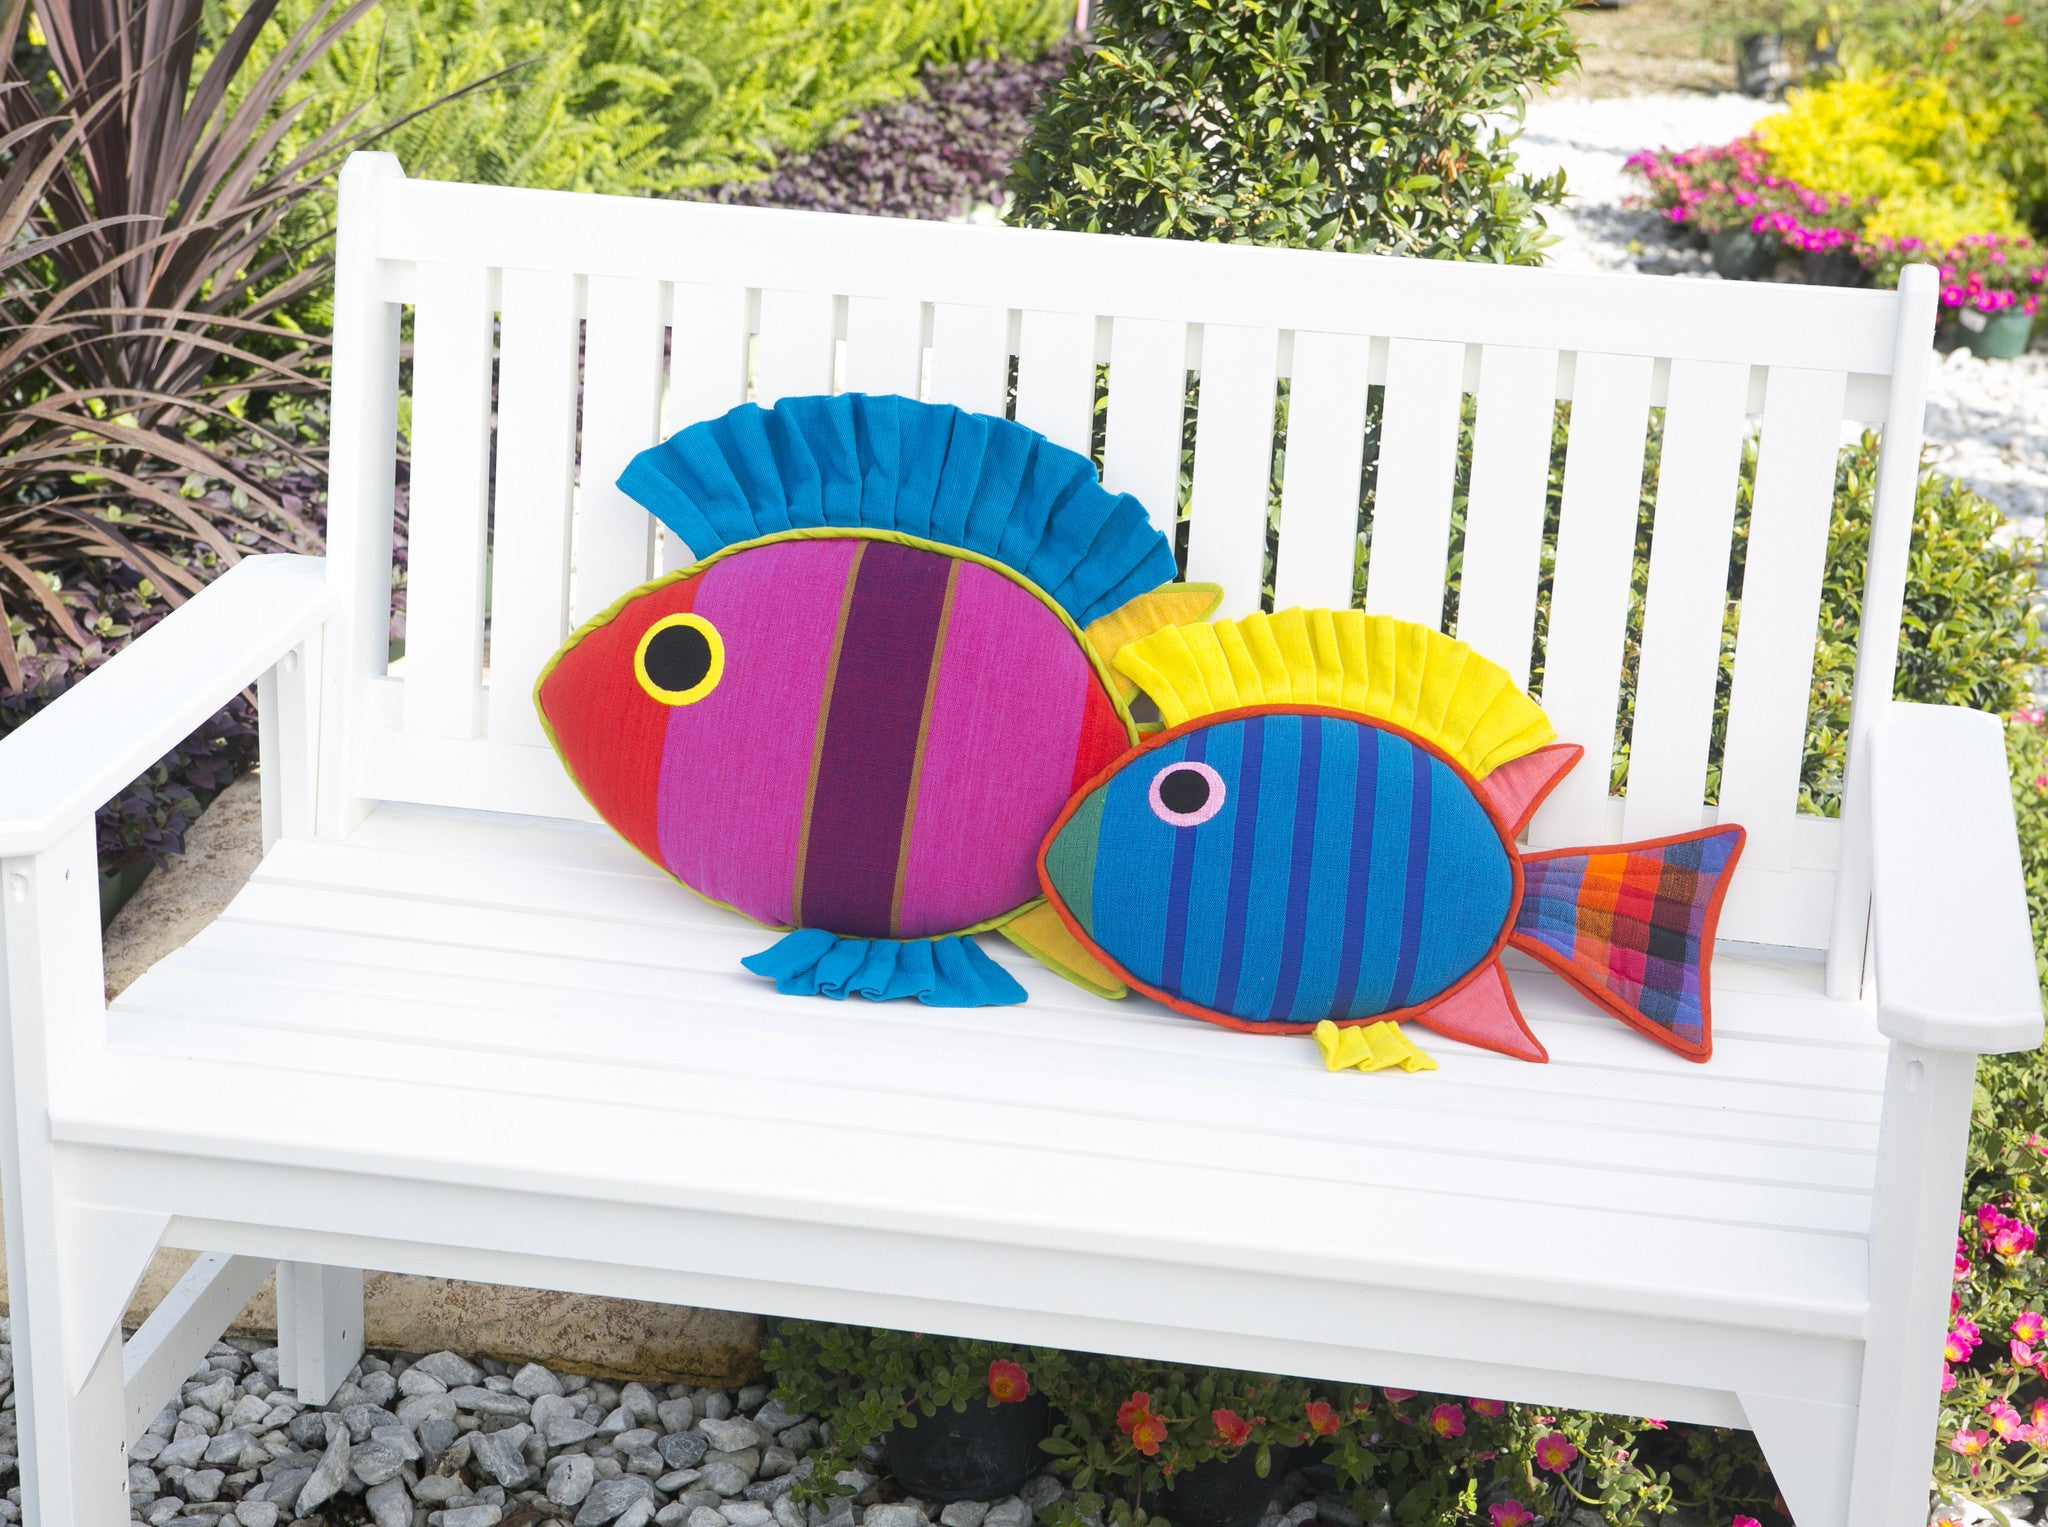 The Rabbit Fish – Adding the perfect punch of color! (Mindy shown in large size & Sammy in small size)